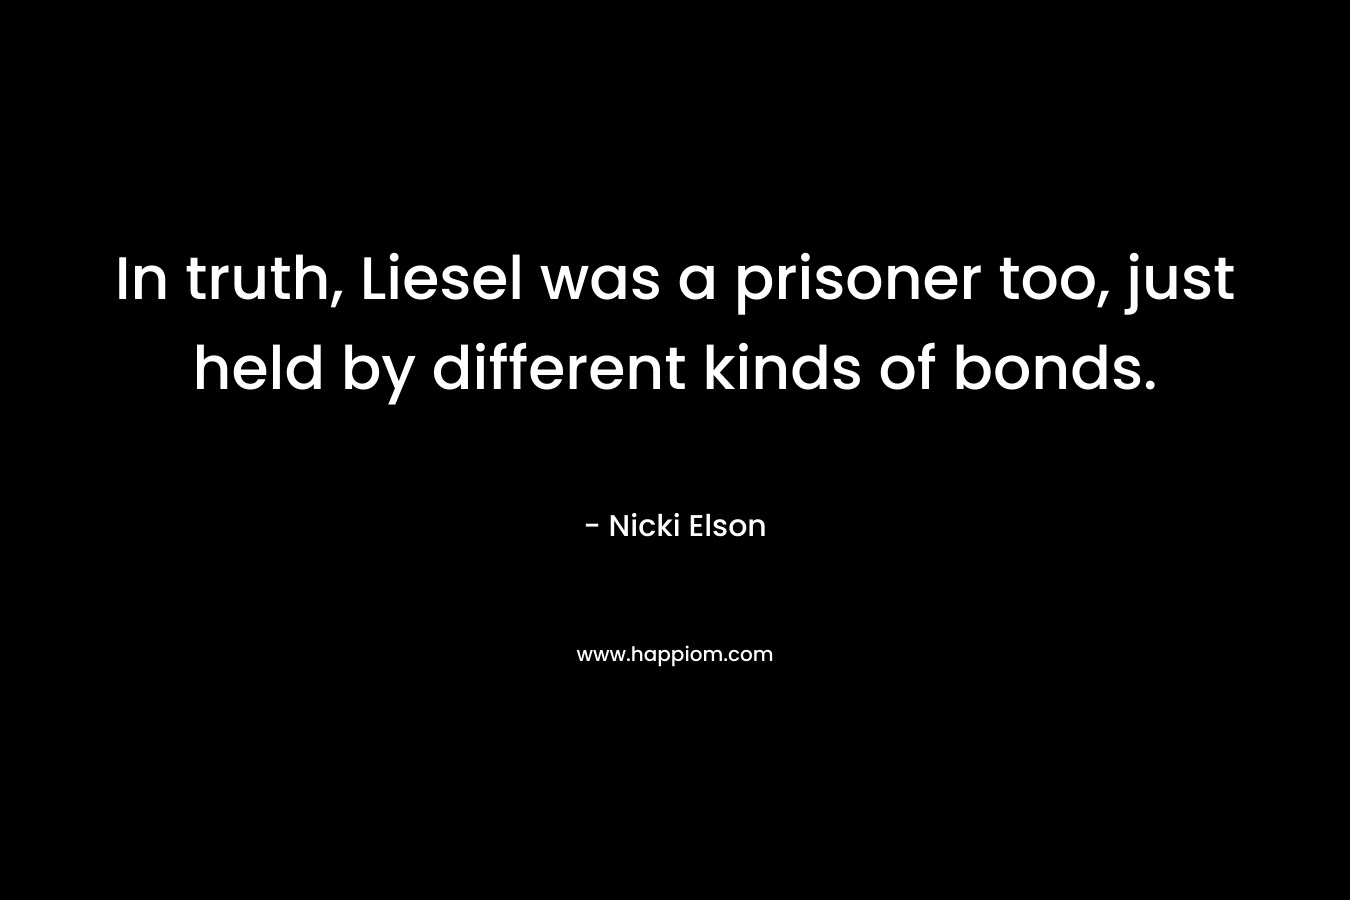 In truth, Liesel was a prisoner too, just held by different kinds of bonds. – Nicki Elson